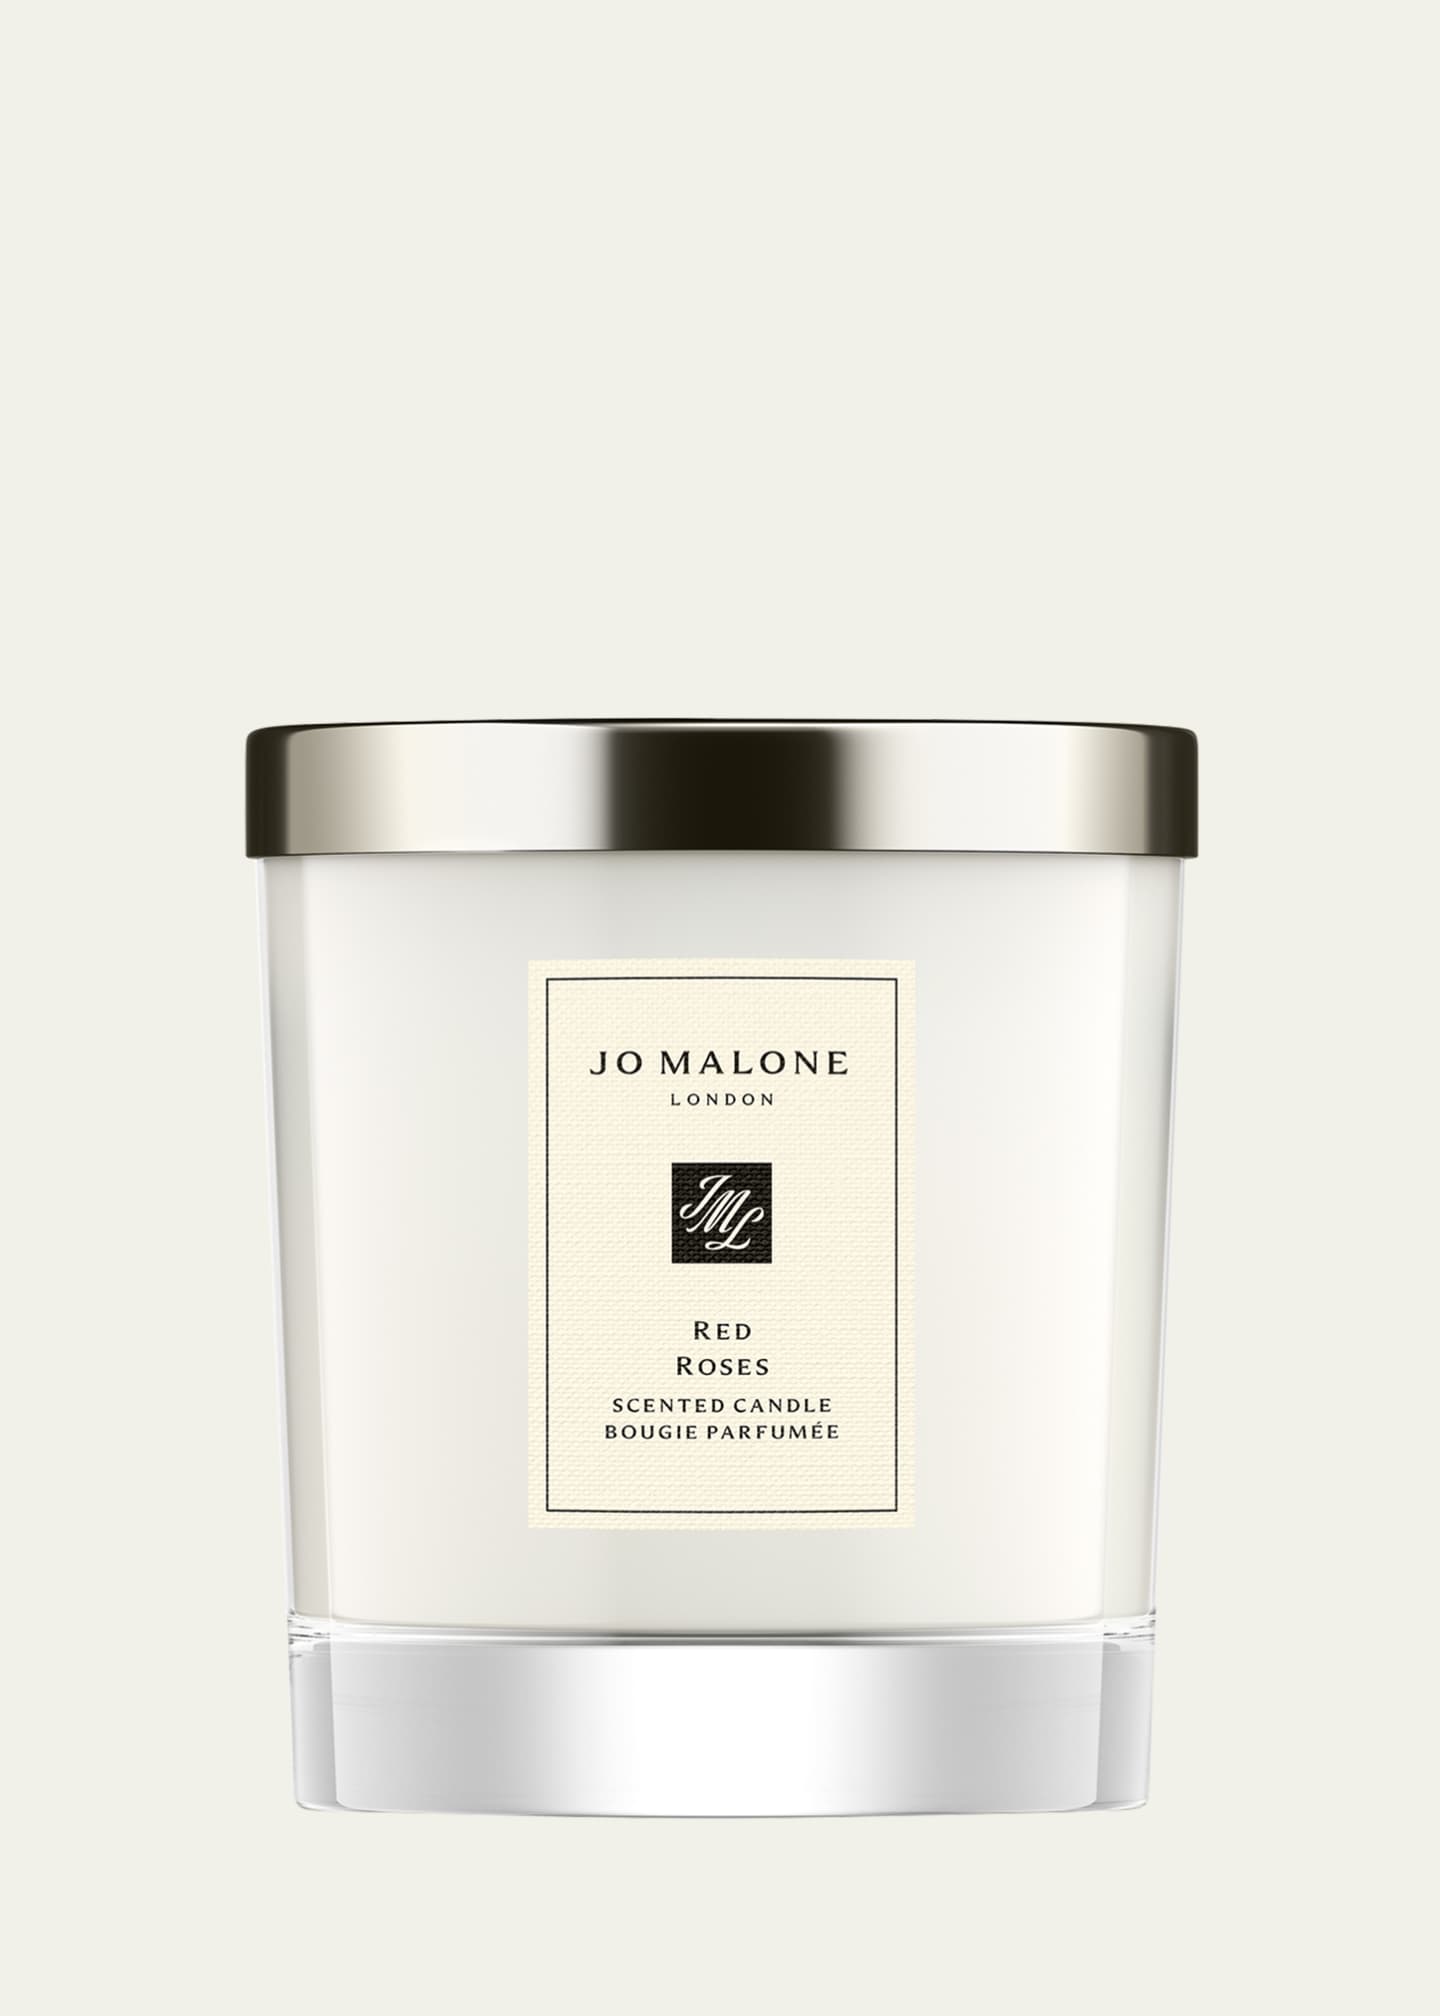 Jo Malone London 7 oz. Red Roses Home Candle Image 2 of 5